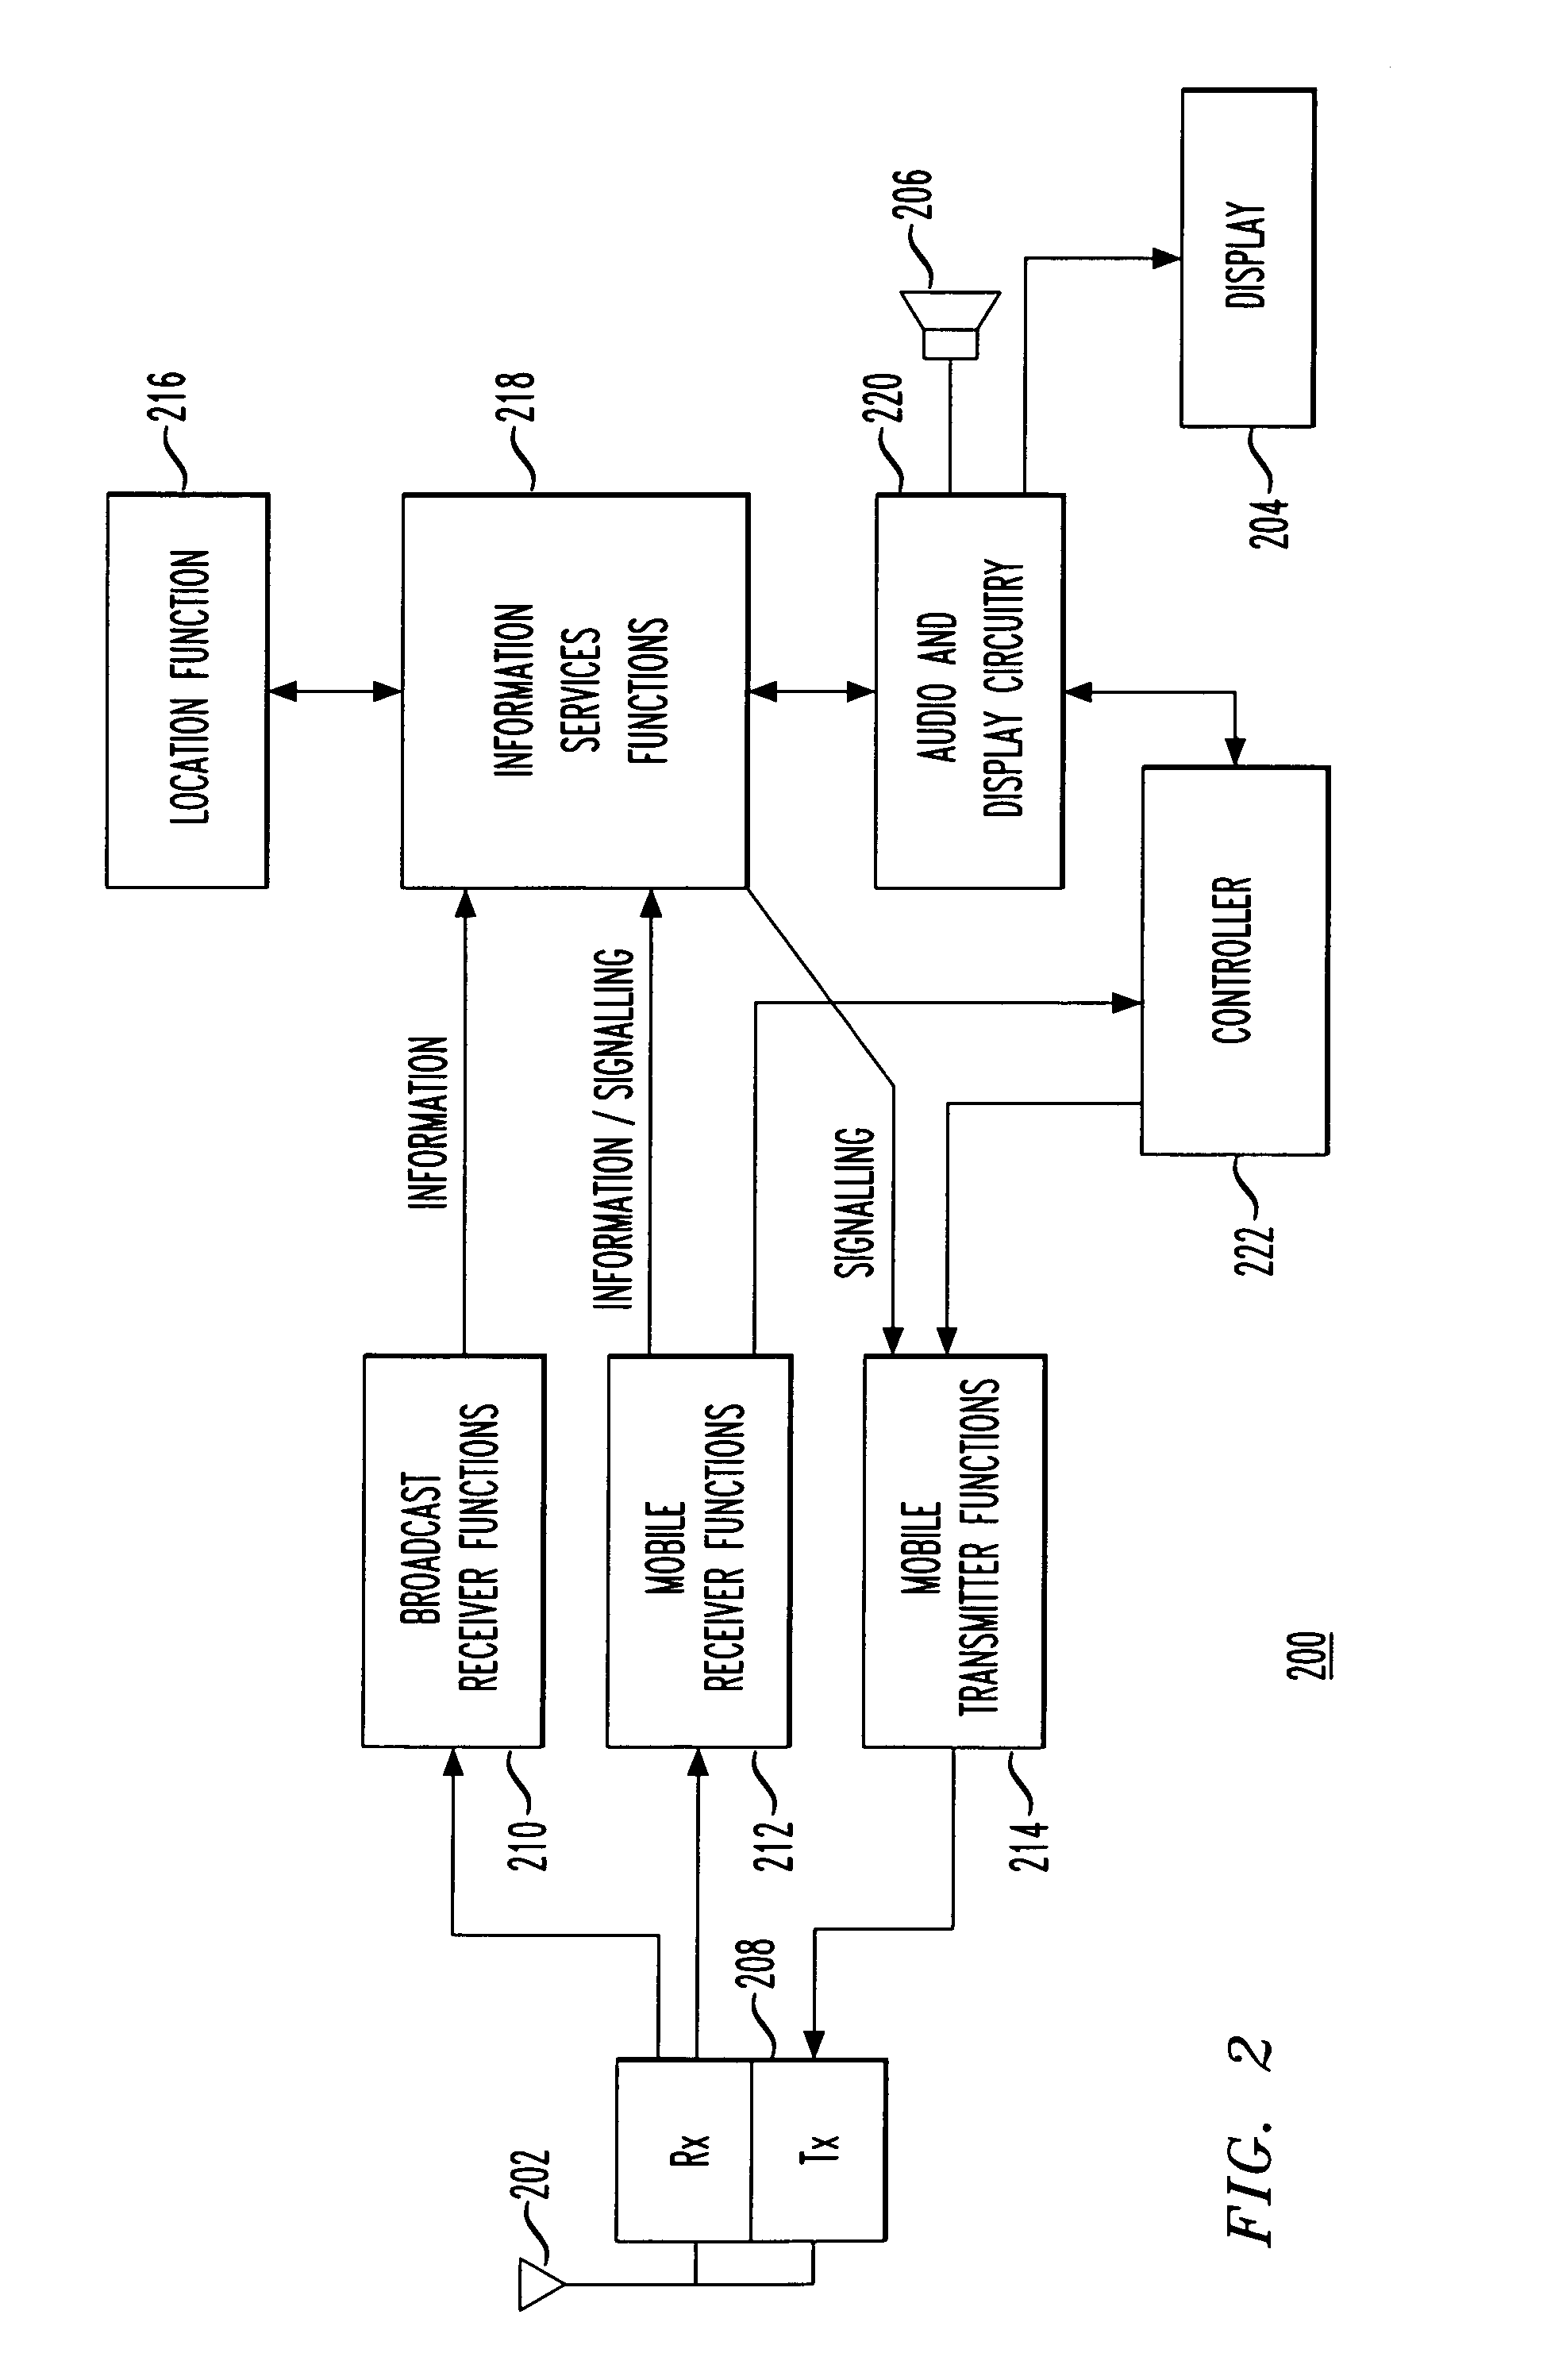 Wireless communication network having a broadcast system for information distribution